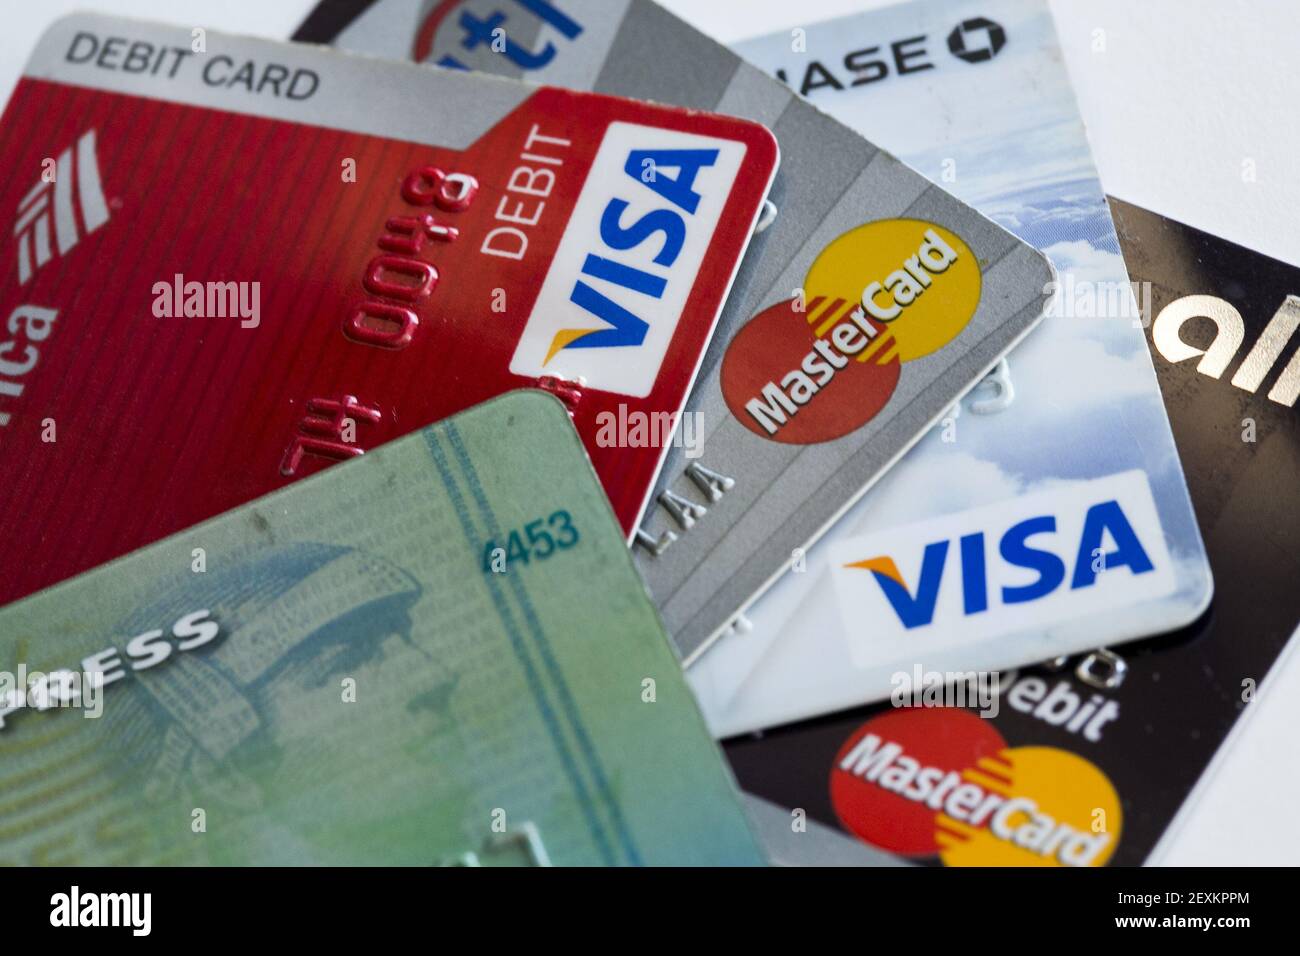 Arranged photos of various U.S. credit cards from Visa, MasterCard and  American Express Stock Photo - Alamy